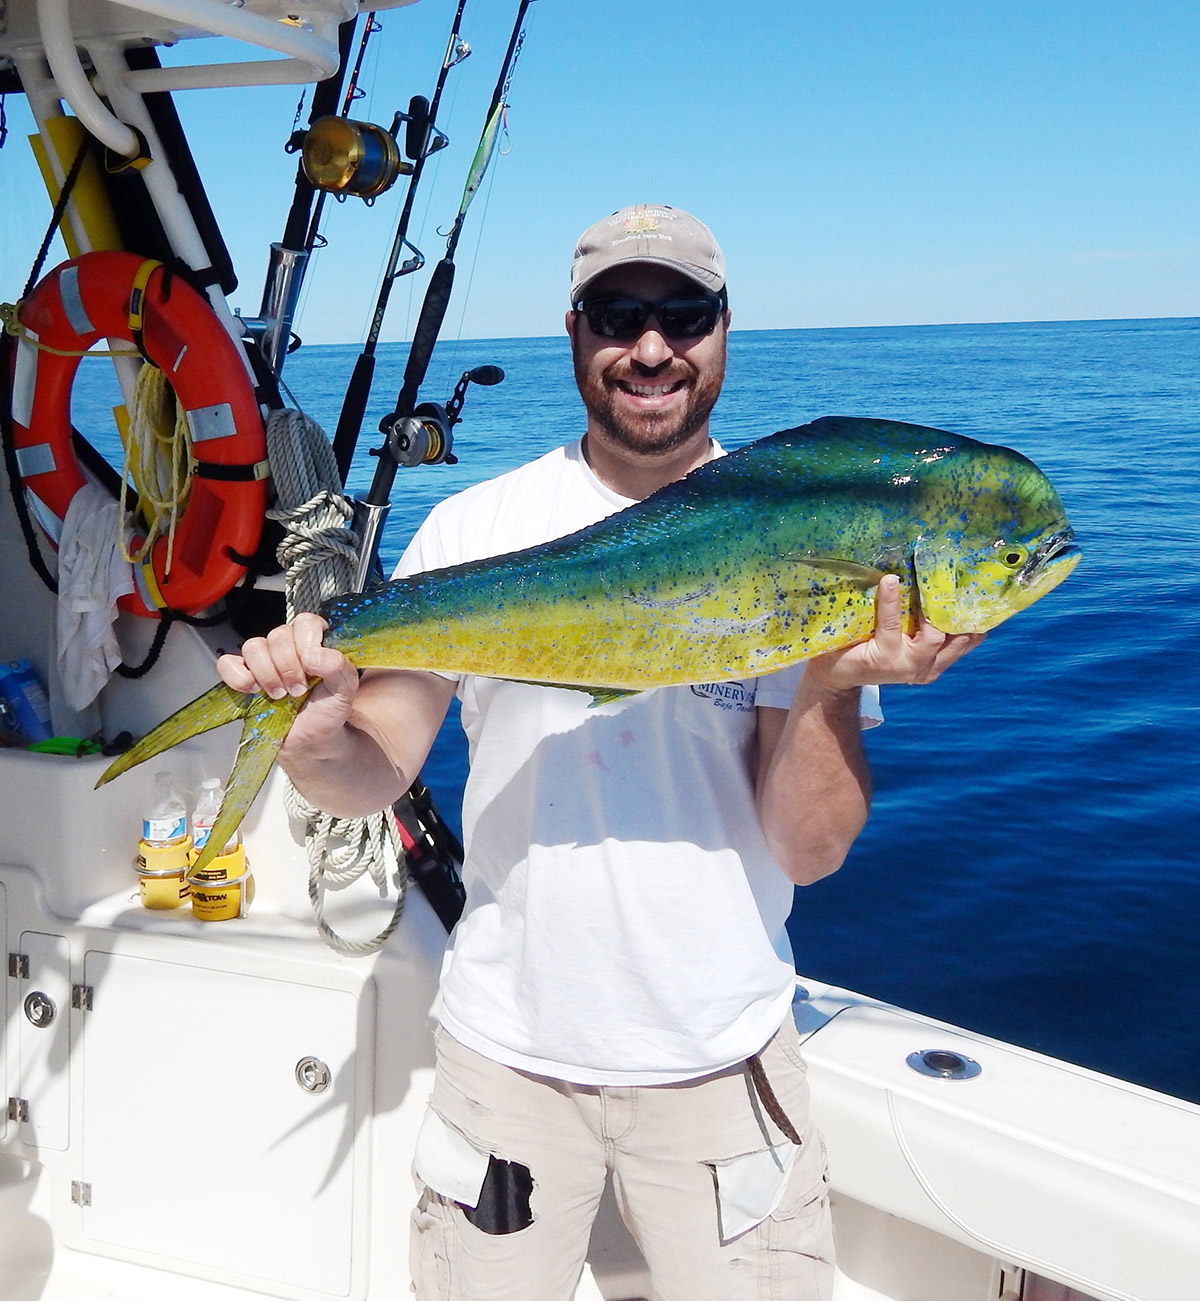 Pot hopping wit hlight casting tackle produced this nice mahi.